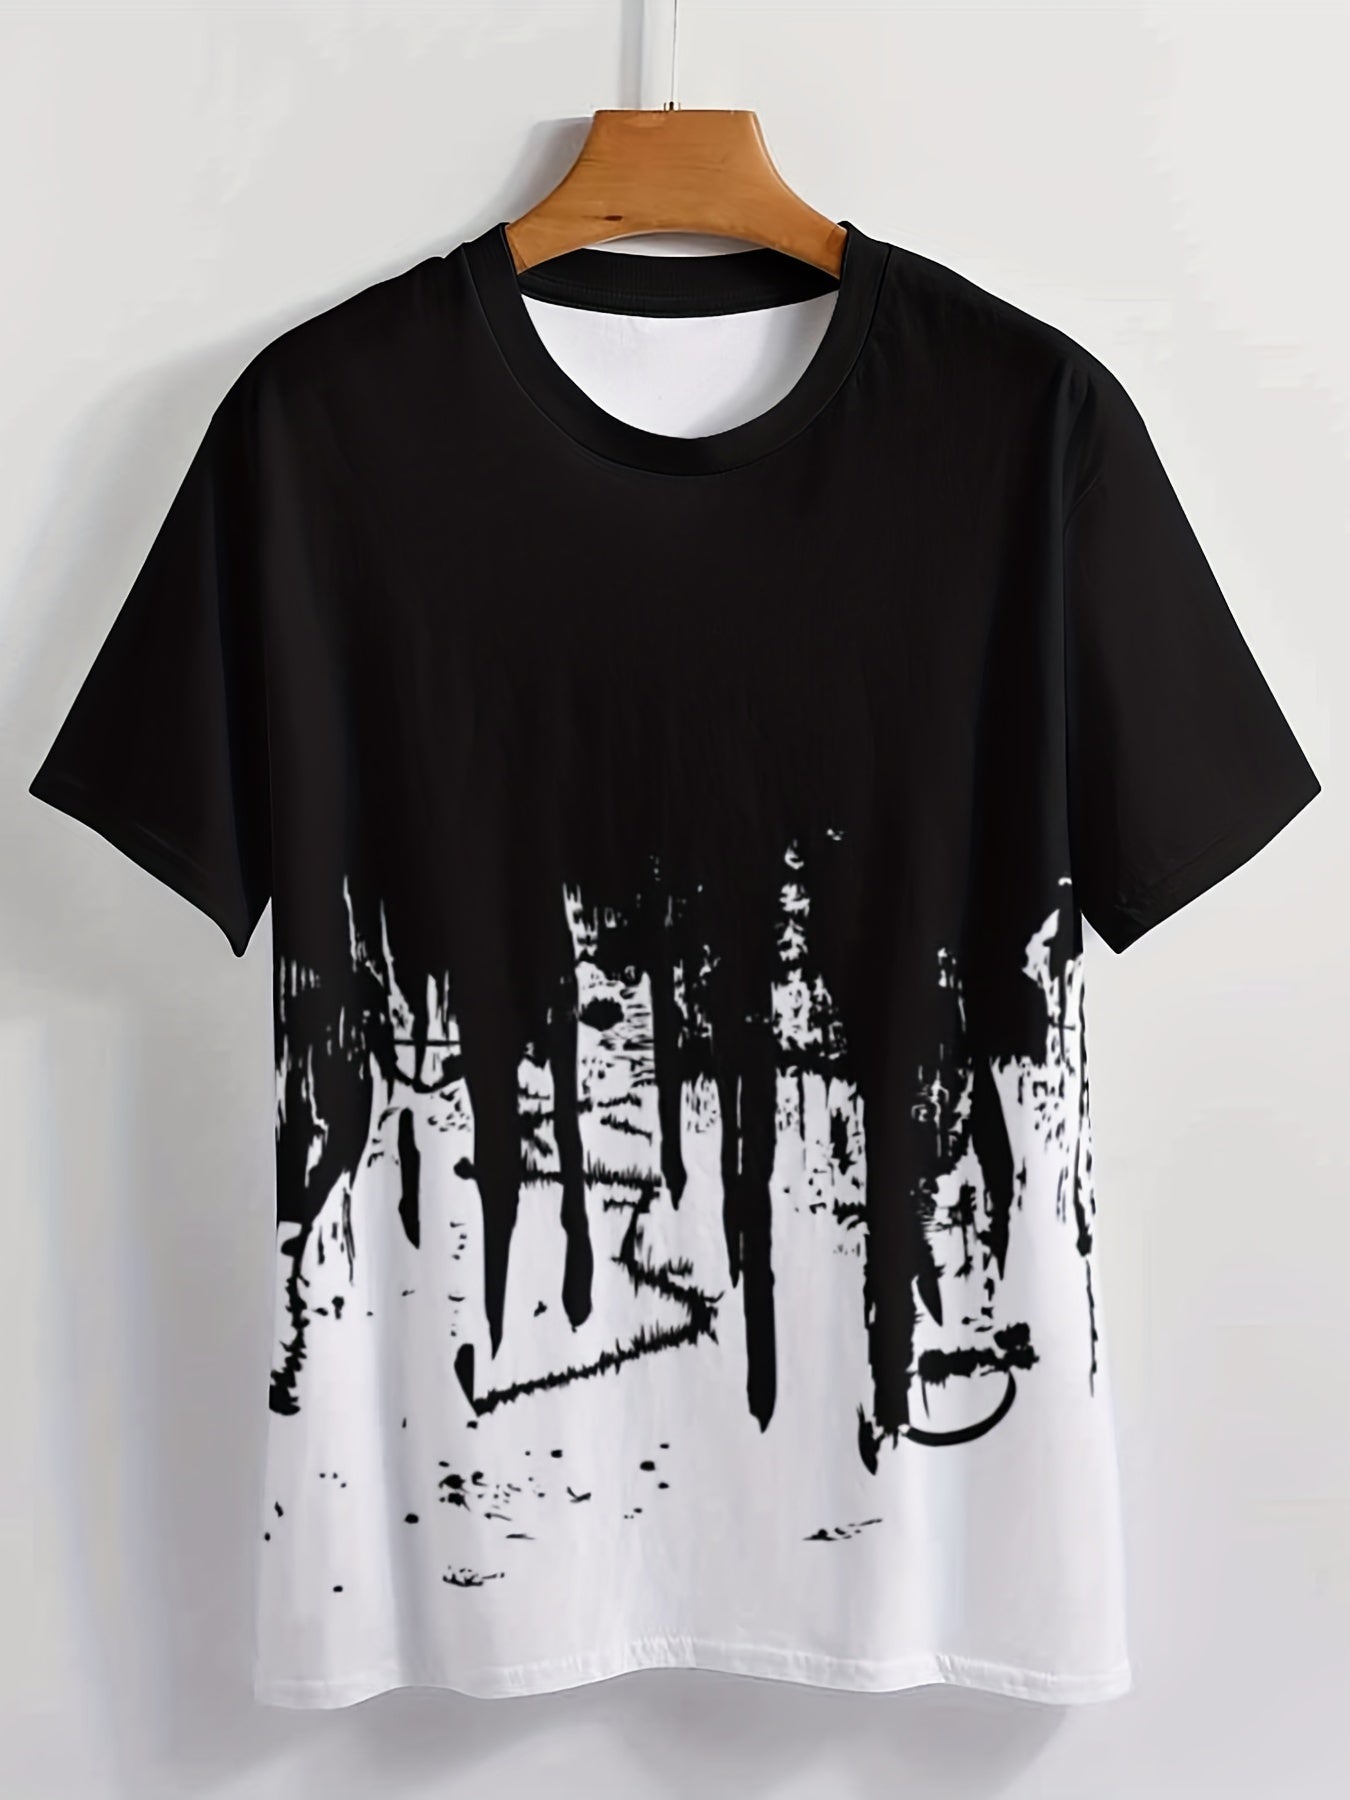 Paint Splash Print, Men's Graphic Design Crew Neck Active T-shirt, Casual Comfy Tees Tshirts For Summer, Men's Clothing Tops For Daily Gym Workout Running